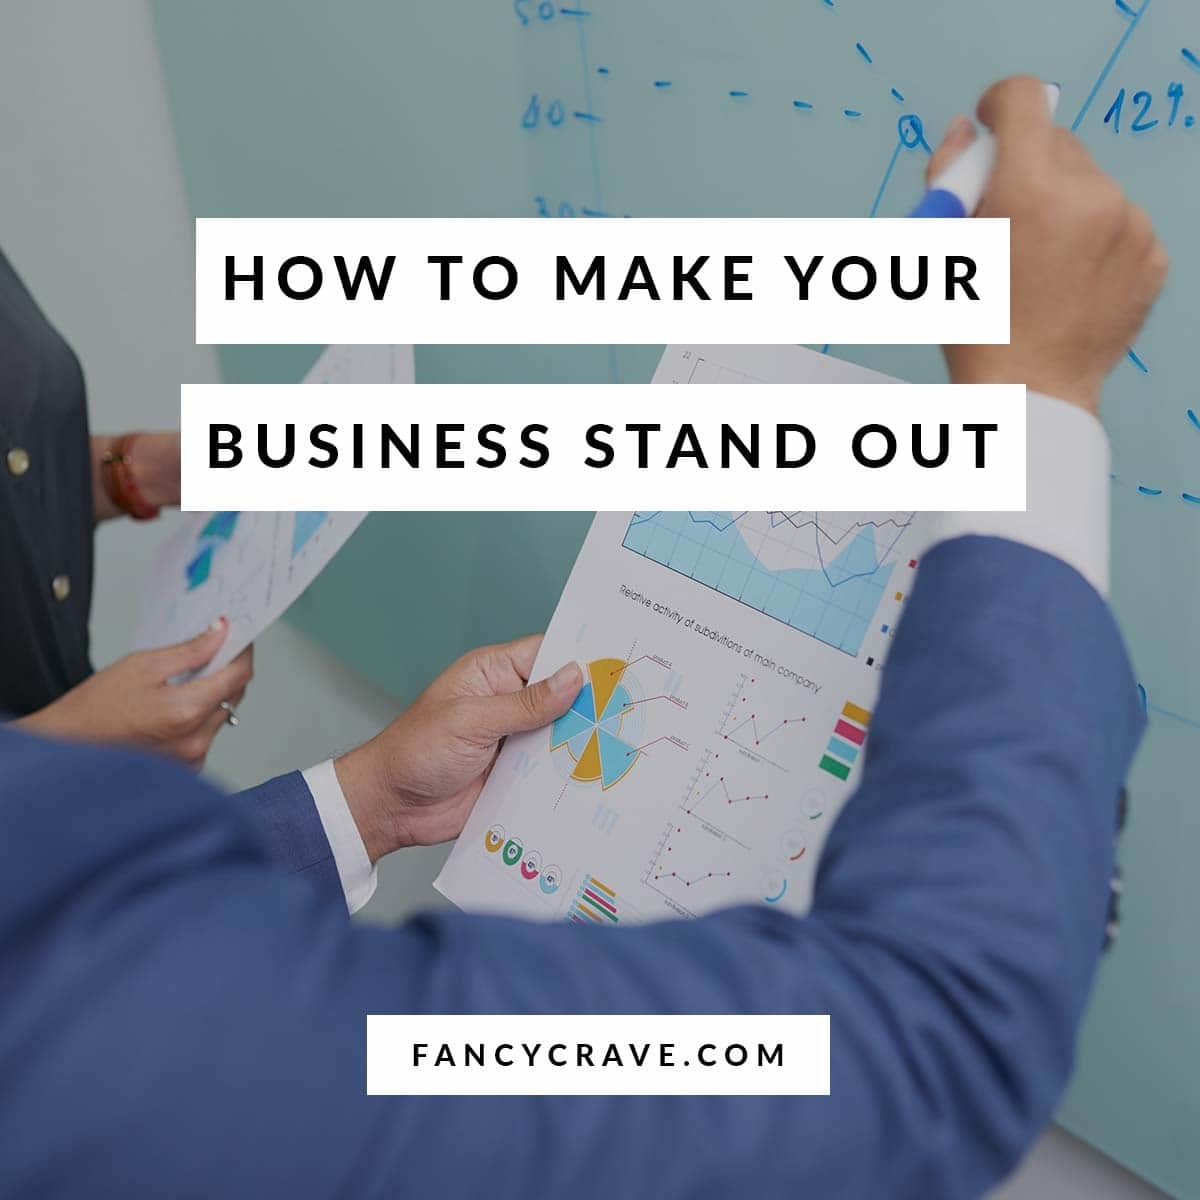 How to Make Your Business Stand Out